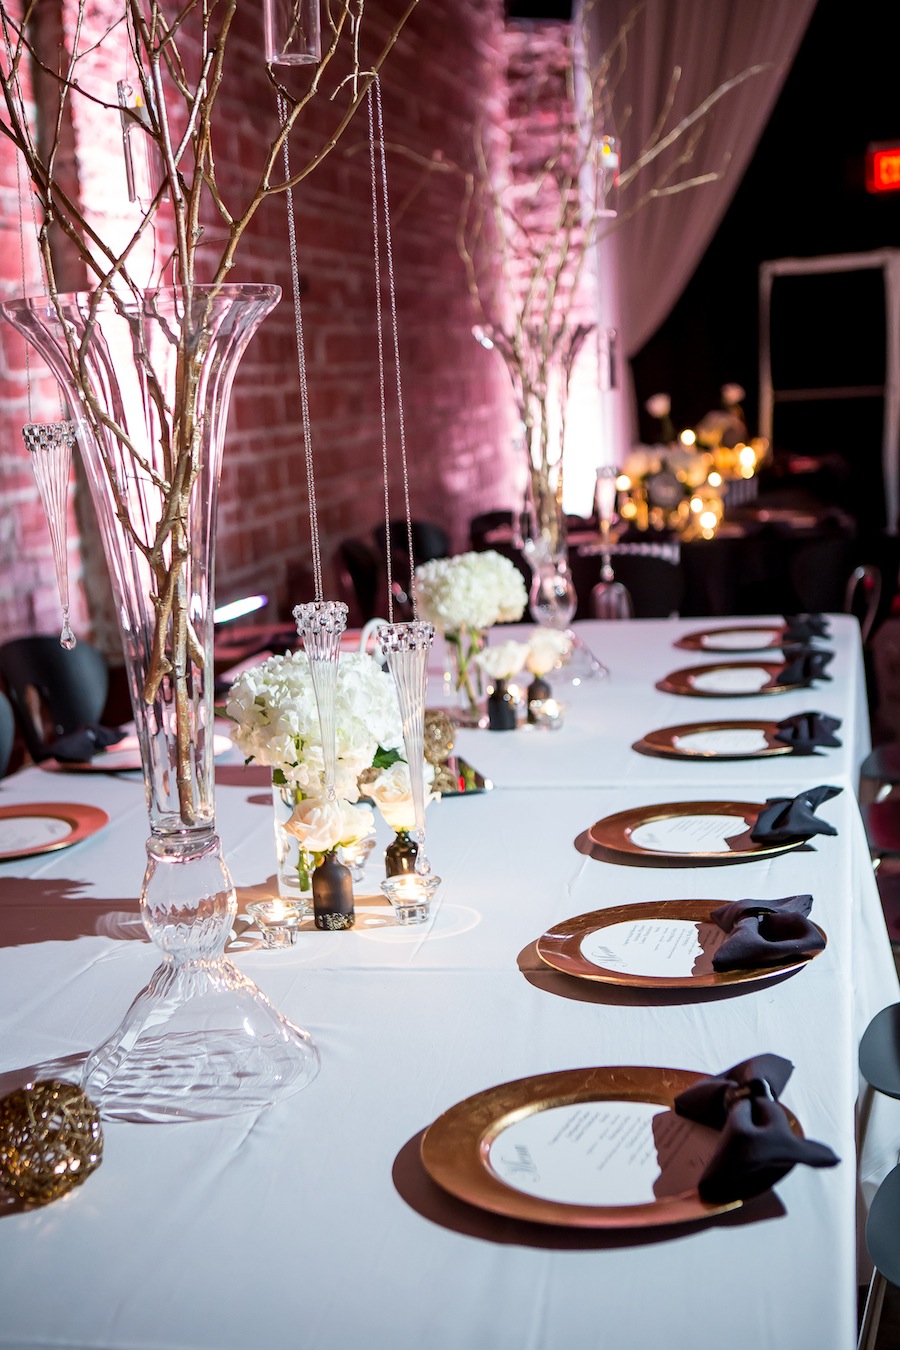 Long Feasting Table with White Wedding Centerpieces and Gold Chargers